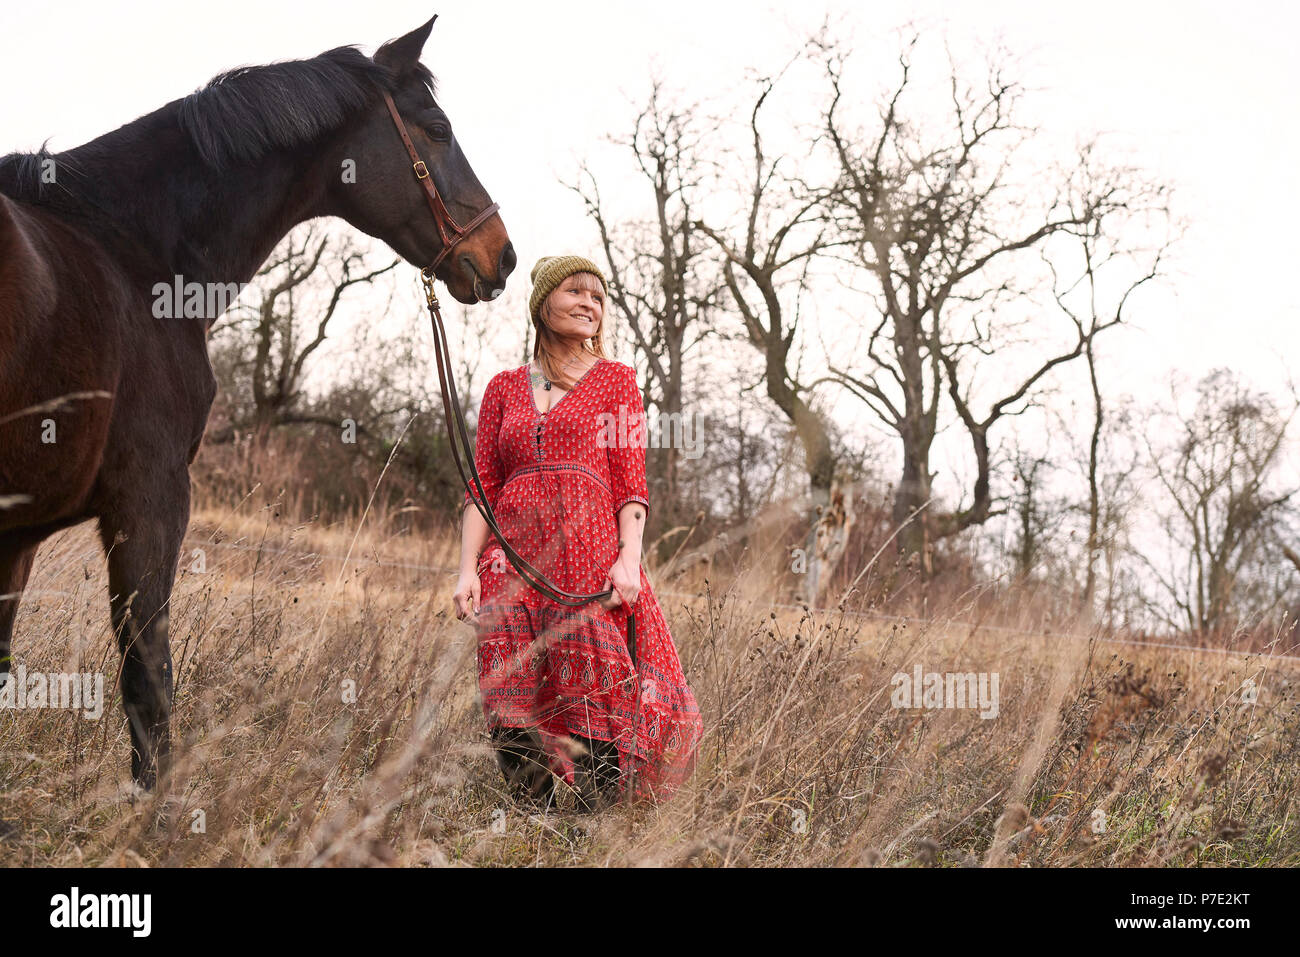 Woman standing with horse Stock Photo